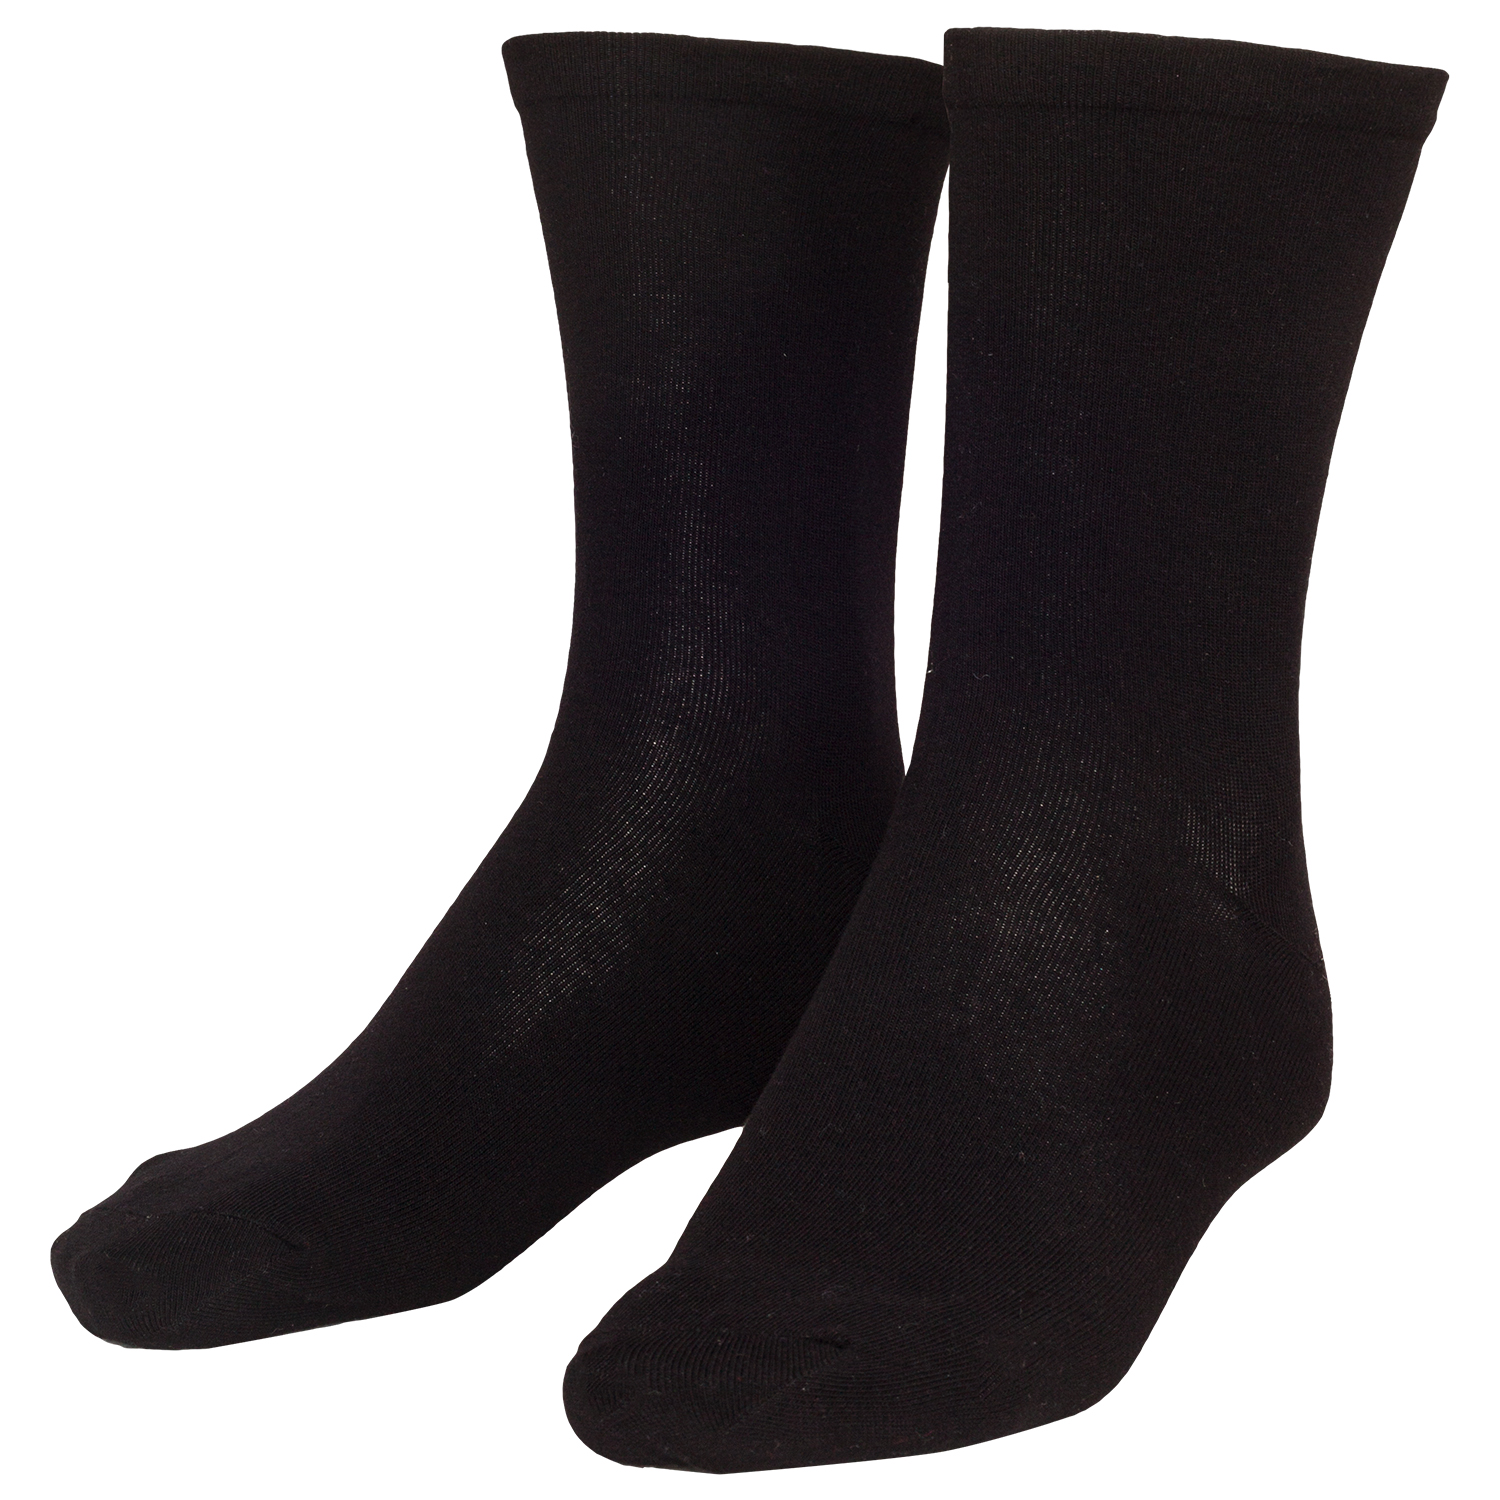 Sock sensitive in black men double pack up to size 51/54